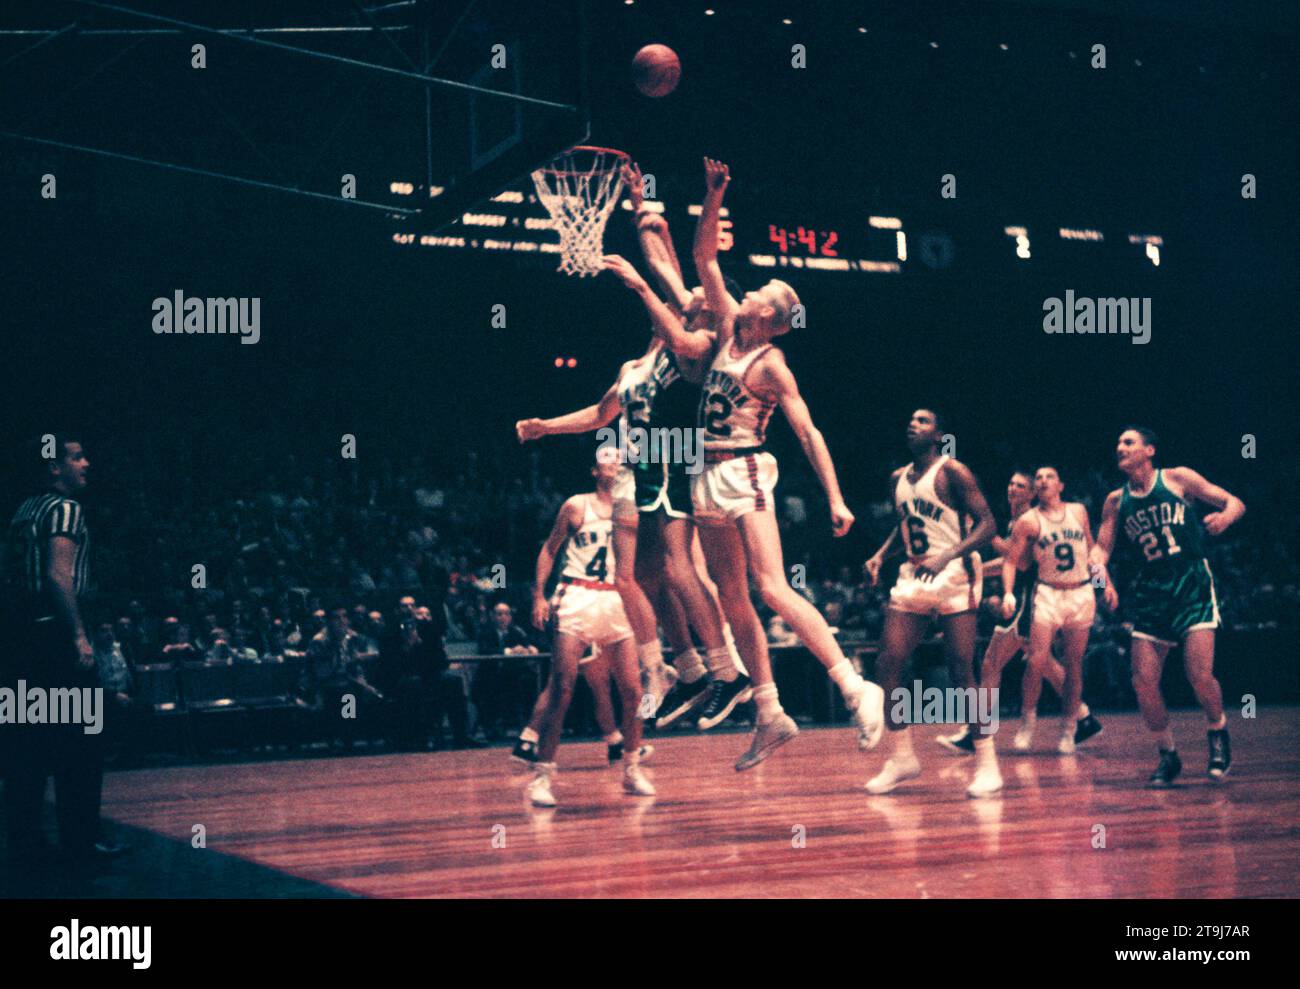 NEW YORK, NY - OCTOBER 25: Bob Cousy #14 of the Boston Celtics shoots as Kenny Sears #12 of the New York Knicks goes for the block during an NBA game on October 25, 1958 at the Madison Square Garden in New York, New York.  (Photo by Hy Peskin) *** Local Caption *** Bob Cousy;Kenny Sears Stock Photo